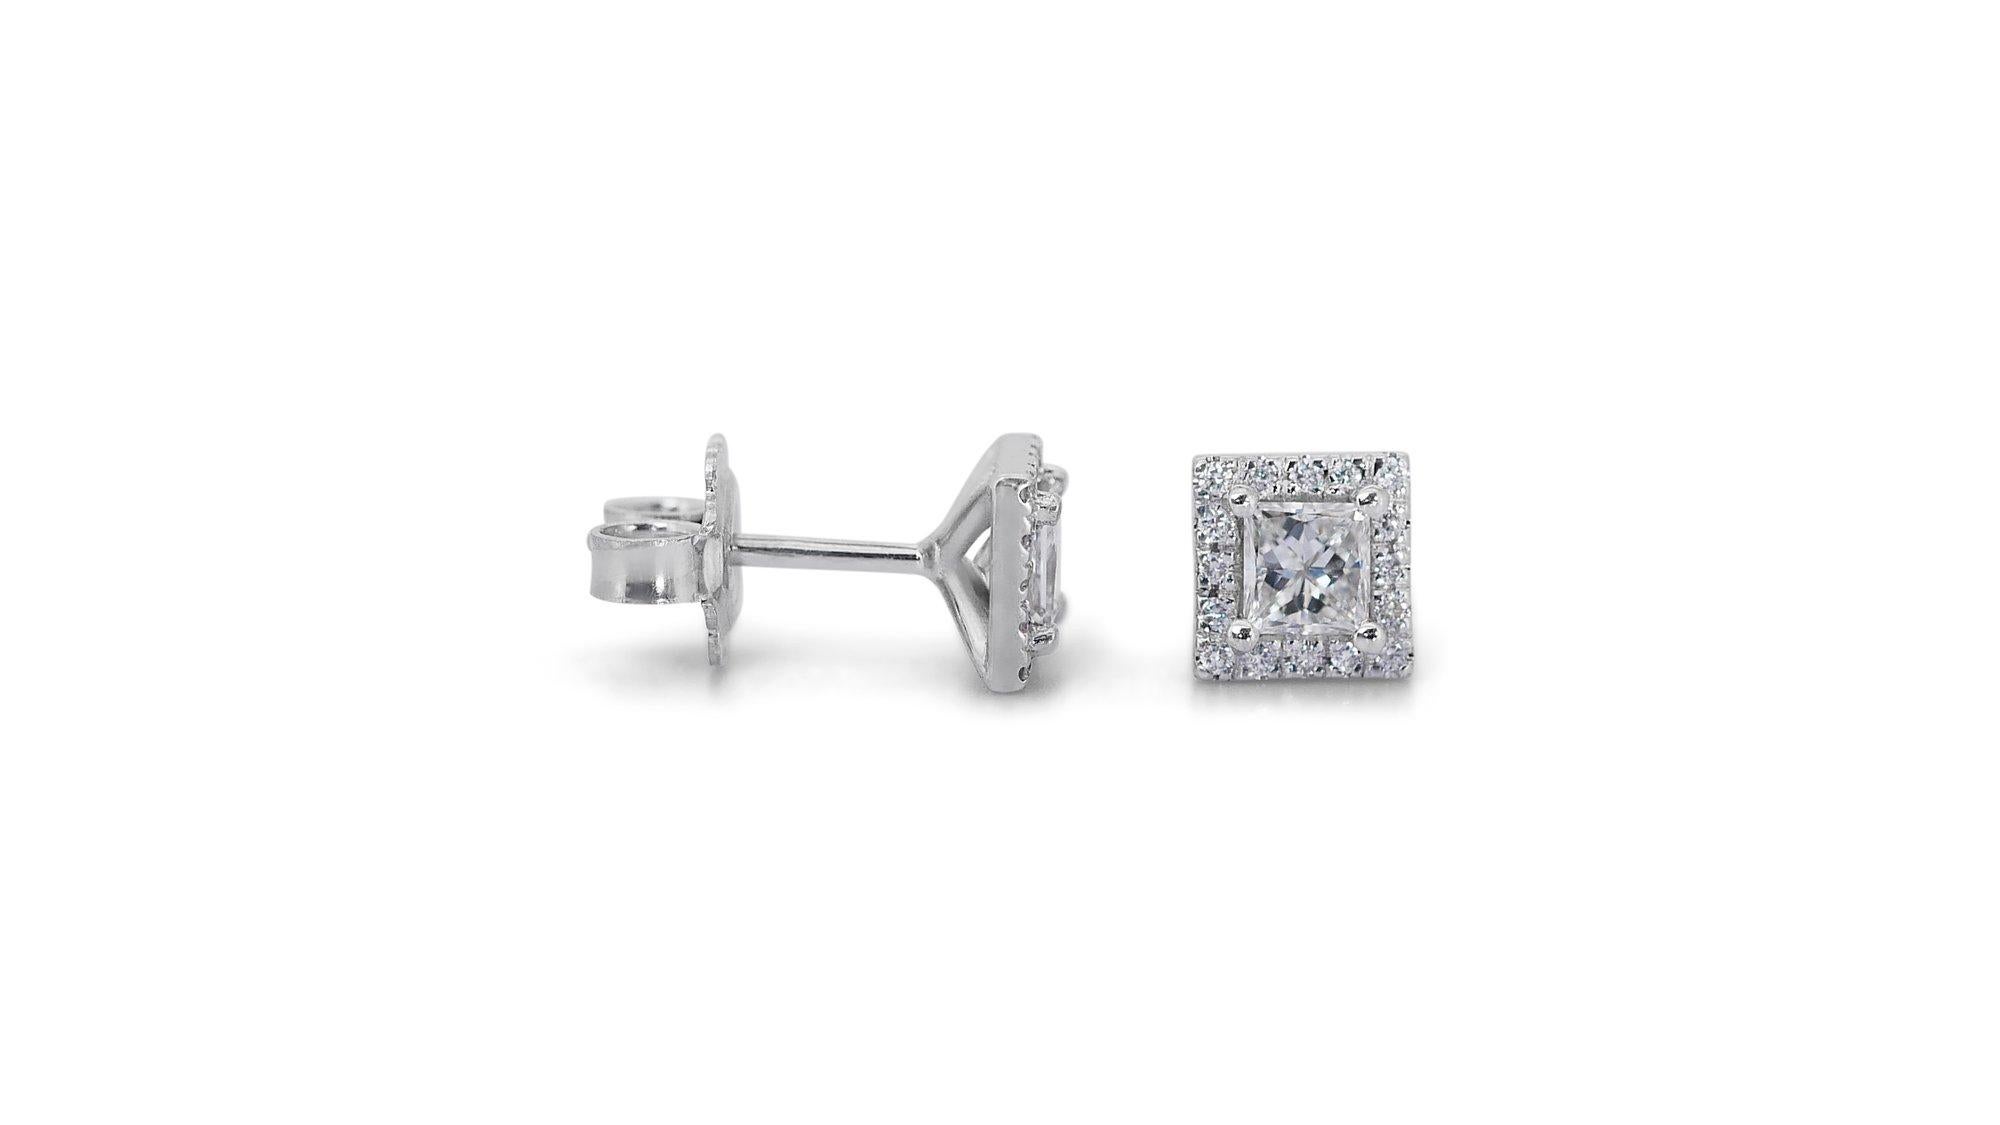 Stunning 2.37ct Diamond Stud Earrings in 18k White Gold - GIA Certified For Sale 2